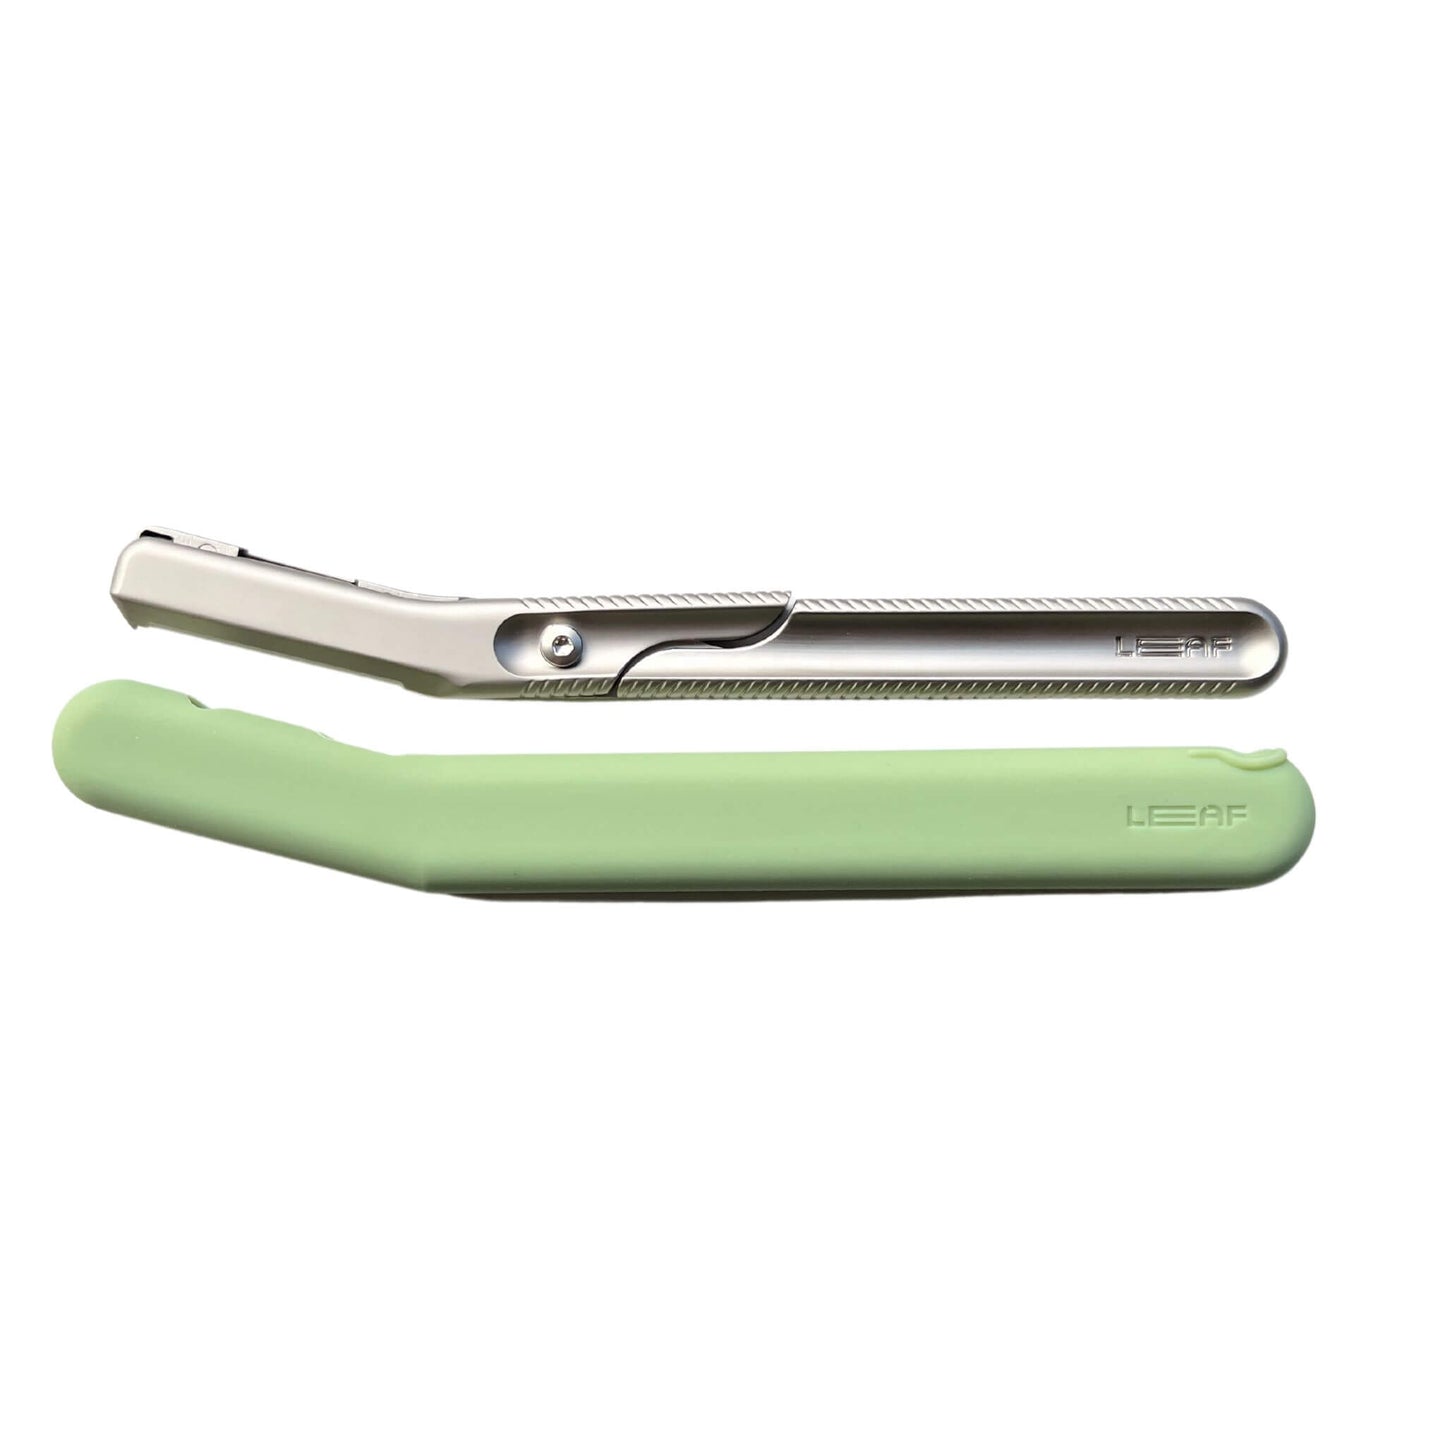 the leaf dermaplaner cover in green silicone next to the leaf dermaplaner in silver - they are lying side by side